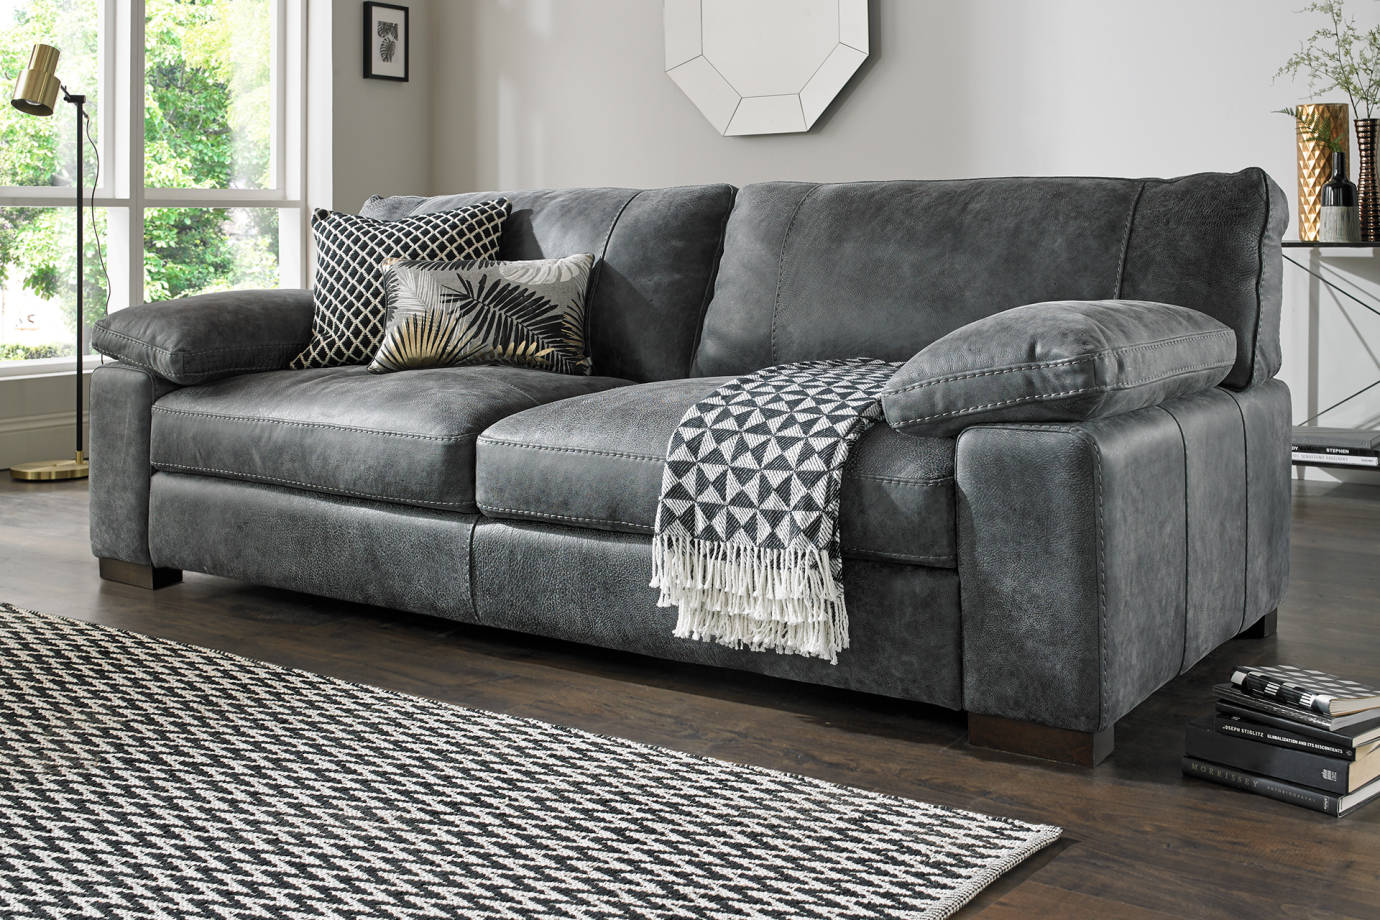 Leather Sofas Sofology, Charcoal Grey Leather Sectional